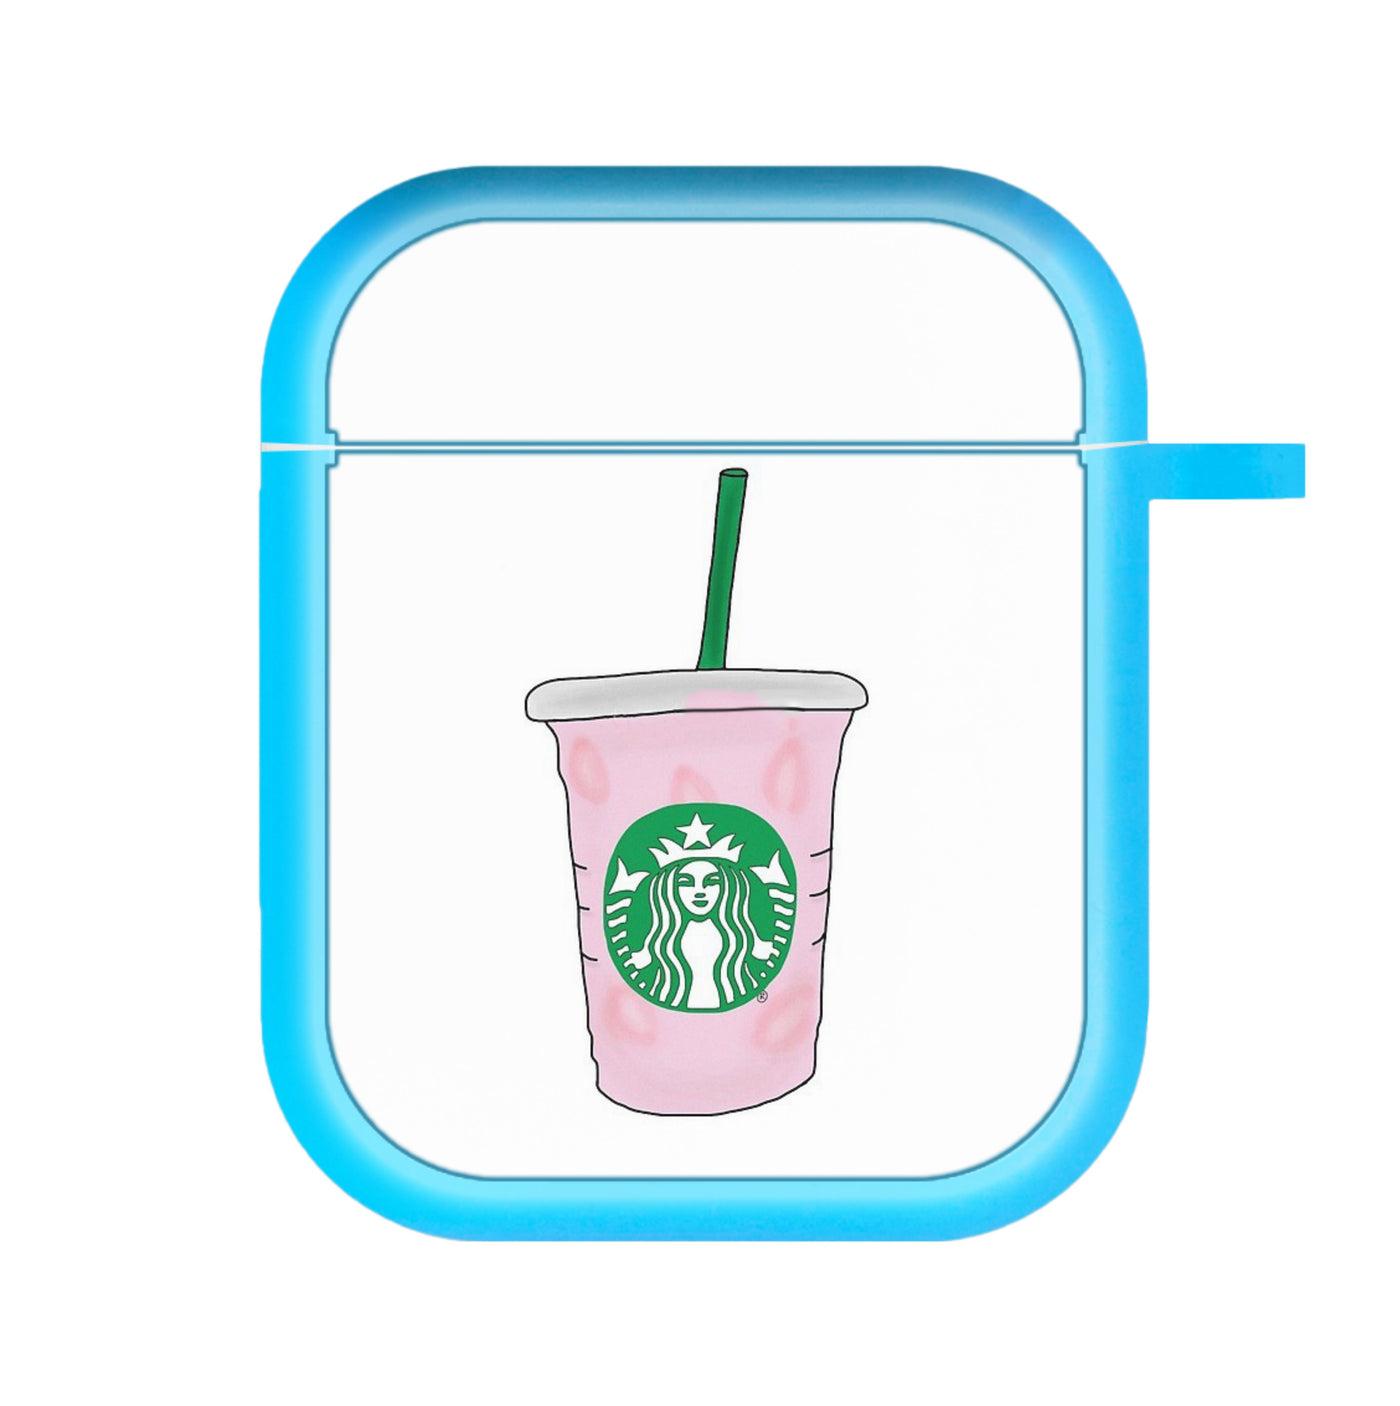 Starbuck Pinkity Drinkity - James Charles AirPods Case